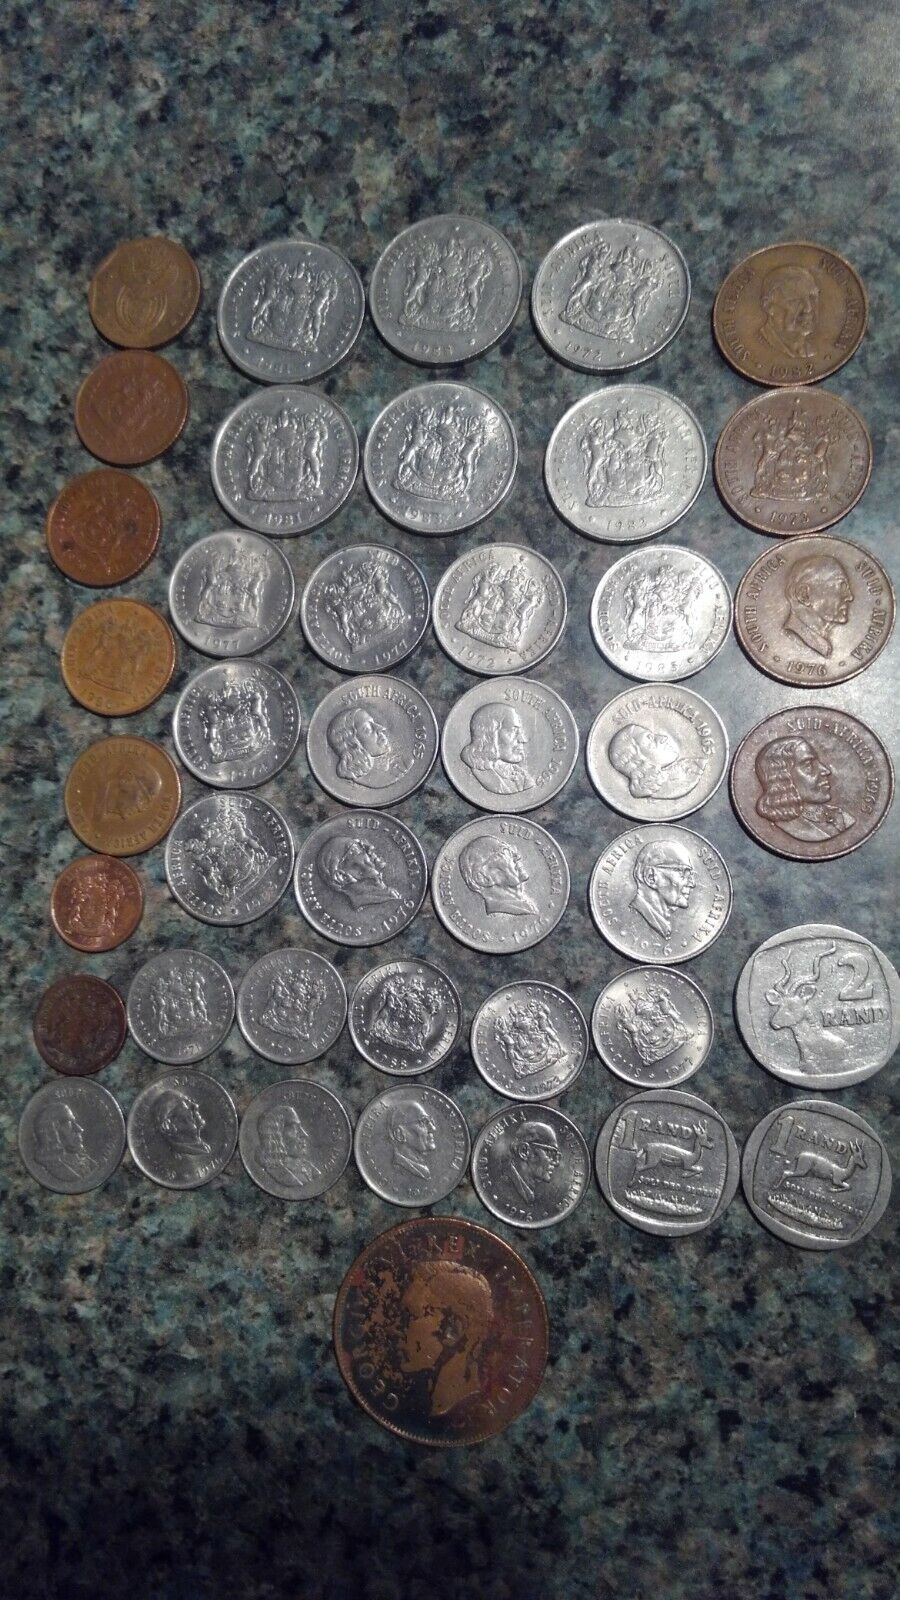 Lot of 43 South Africa Free Shipping Cheap Bargain Gift dated Coins Mostly Genuine 1960s-1990s